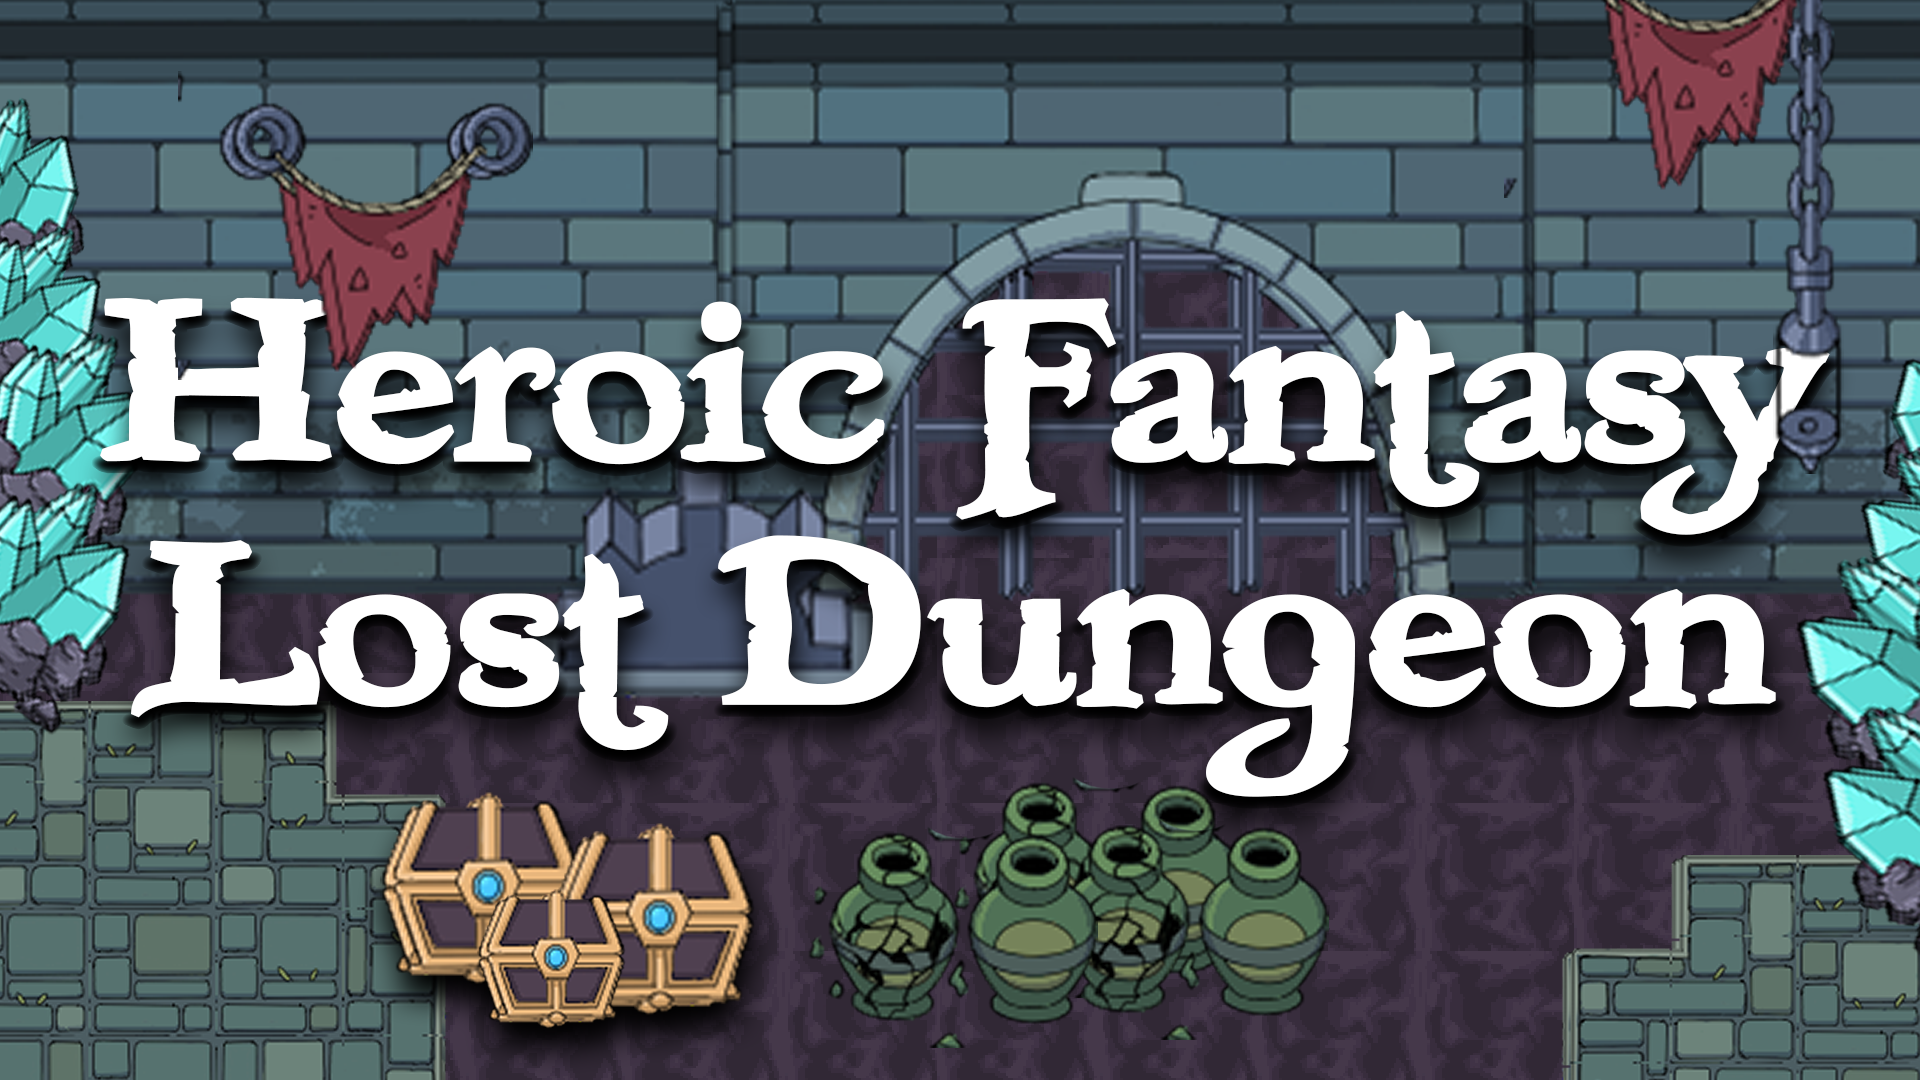 Heroic Fantasy Lost Dungeon